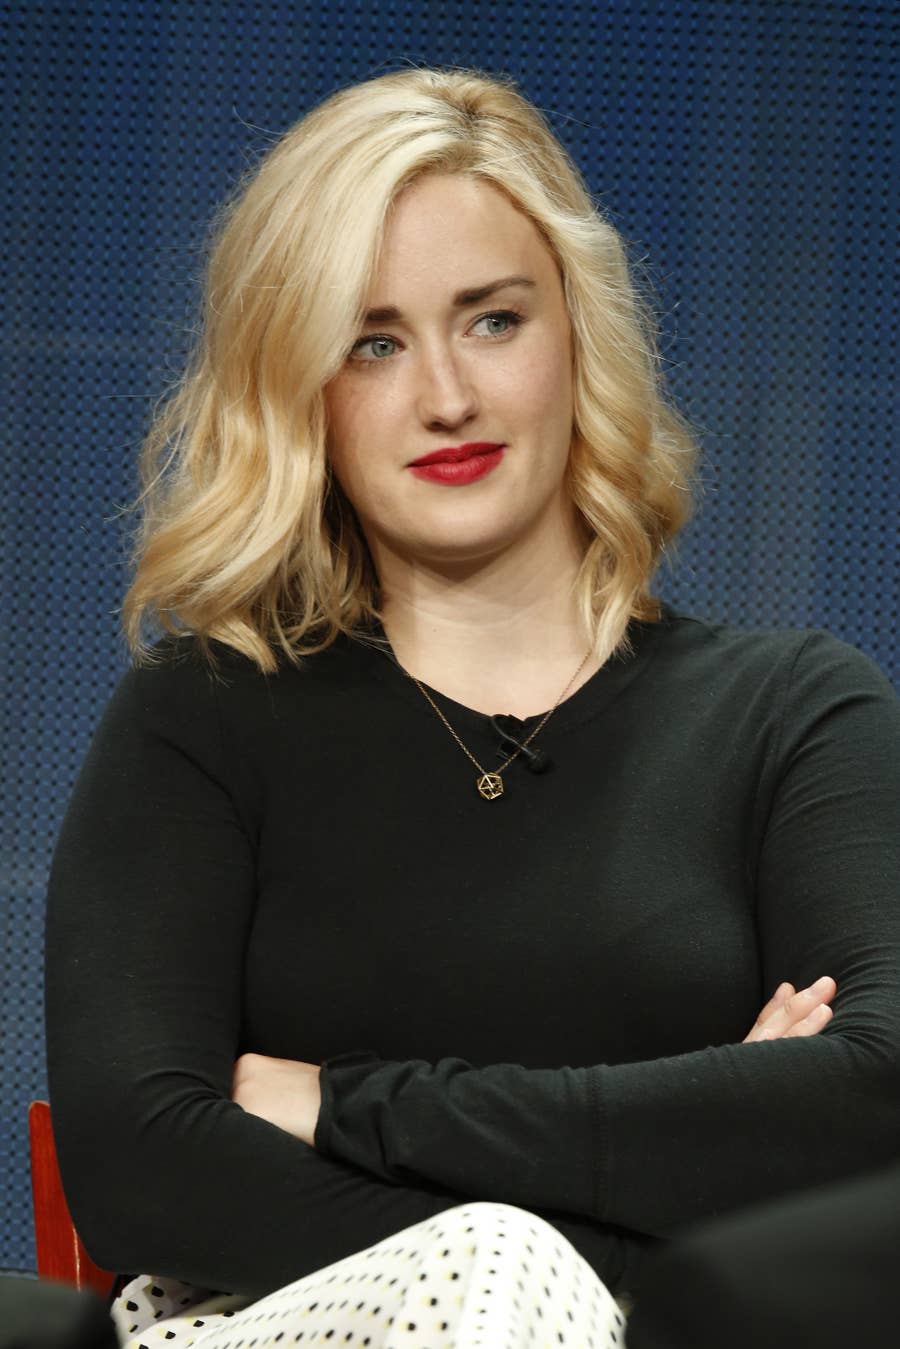 Ashley Johnson As Ellie's Mom Has Already Justified The Last Of Us HBO Show